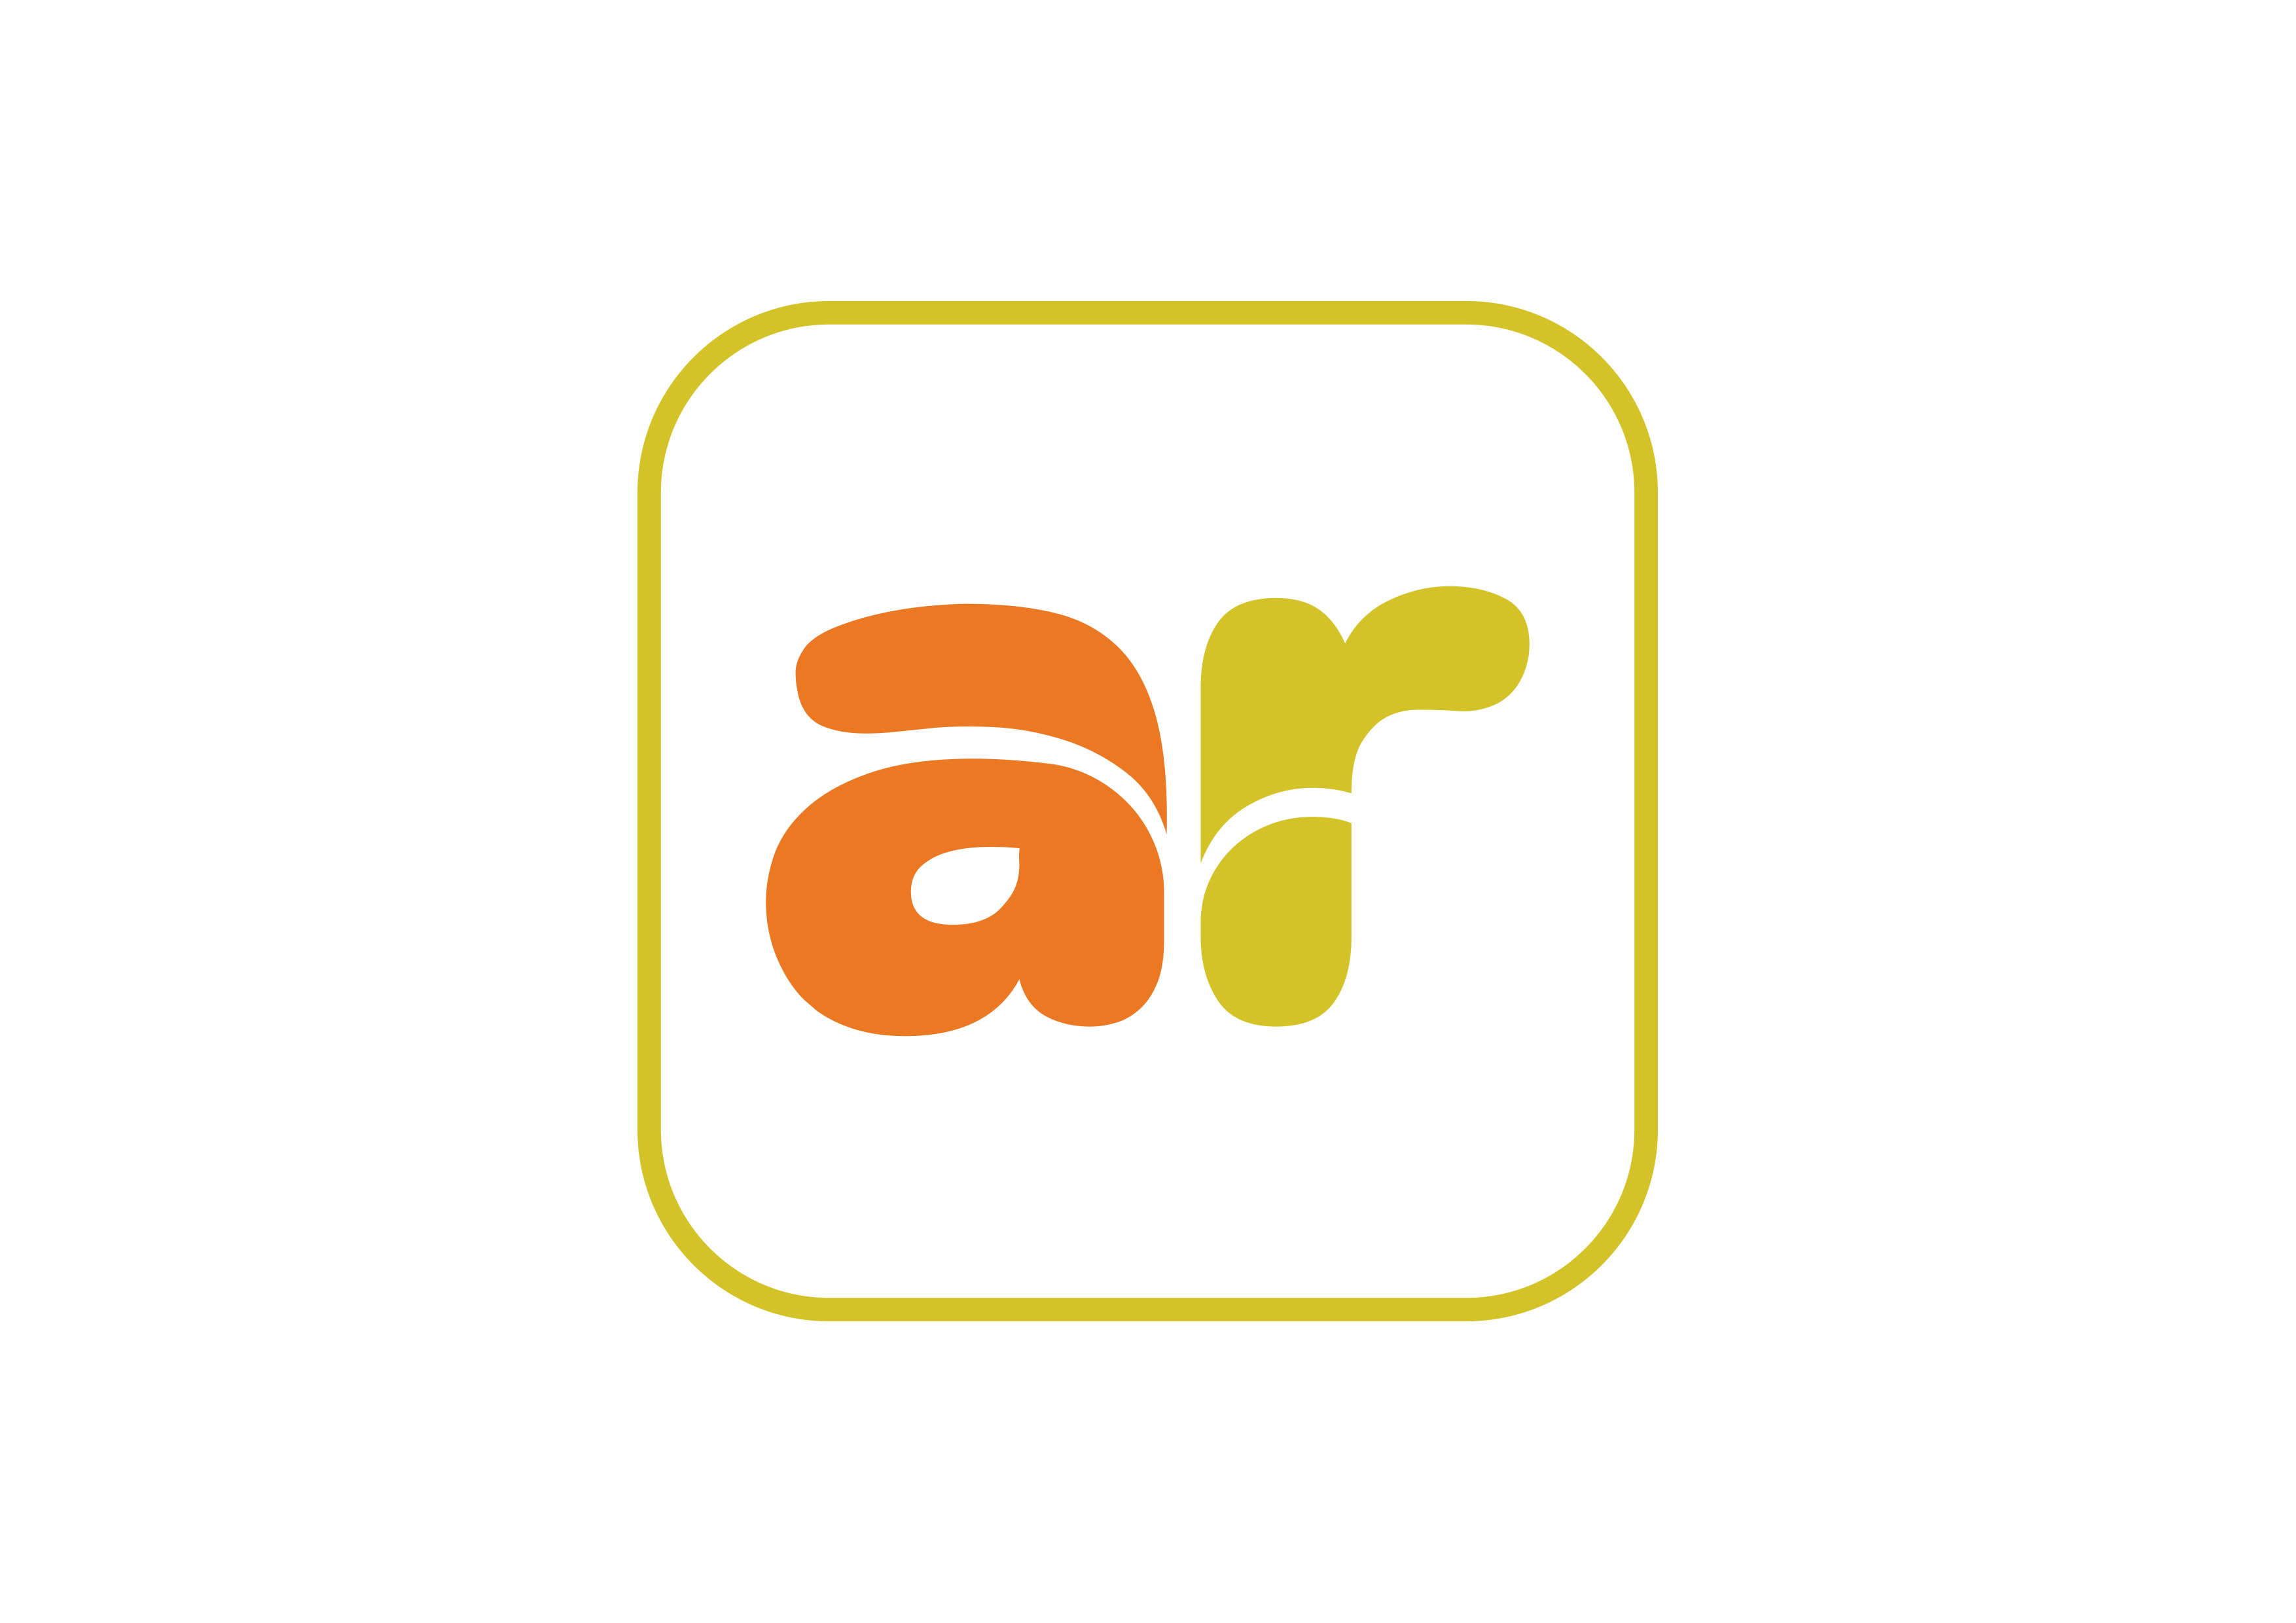 Orange and yellow logo with the letter ar.